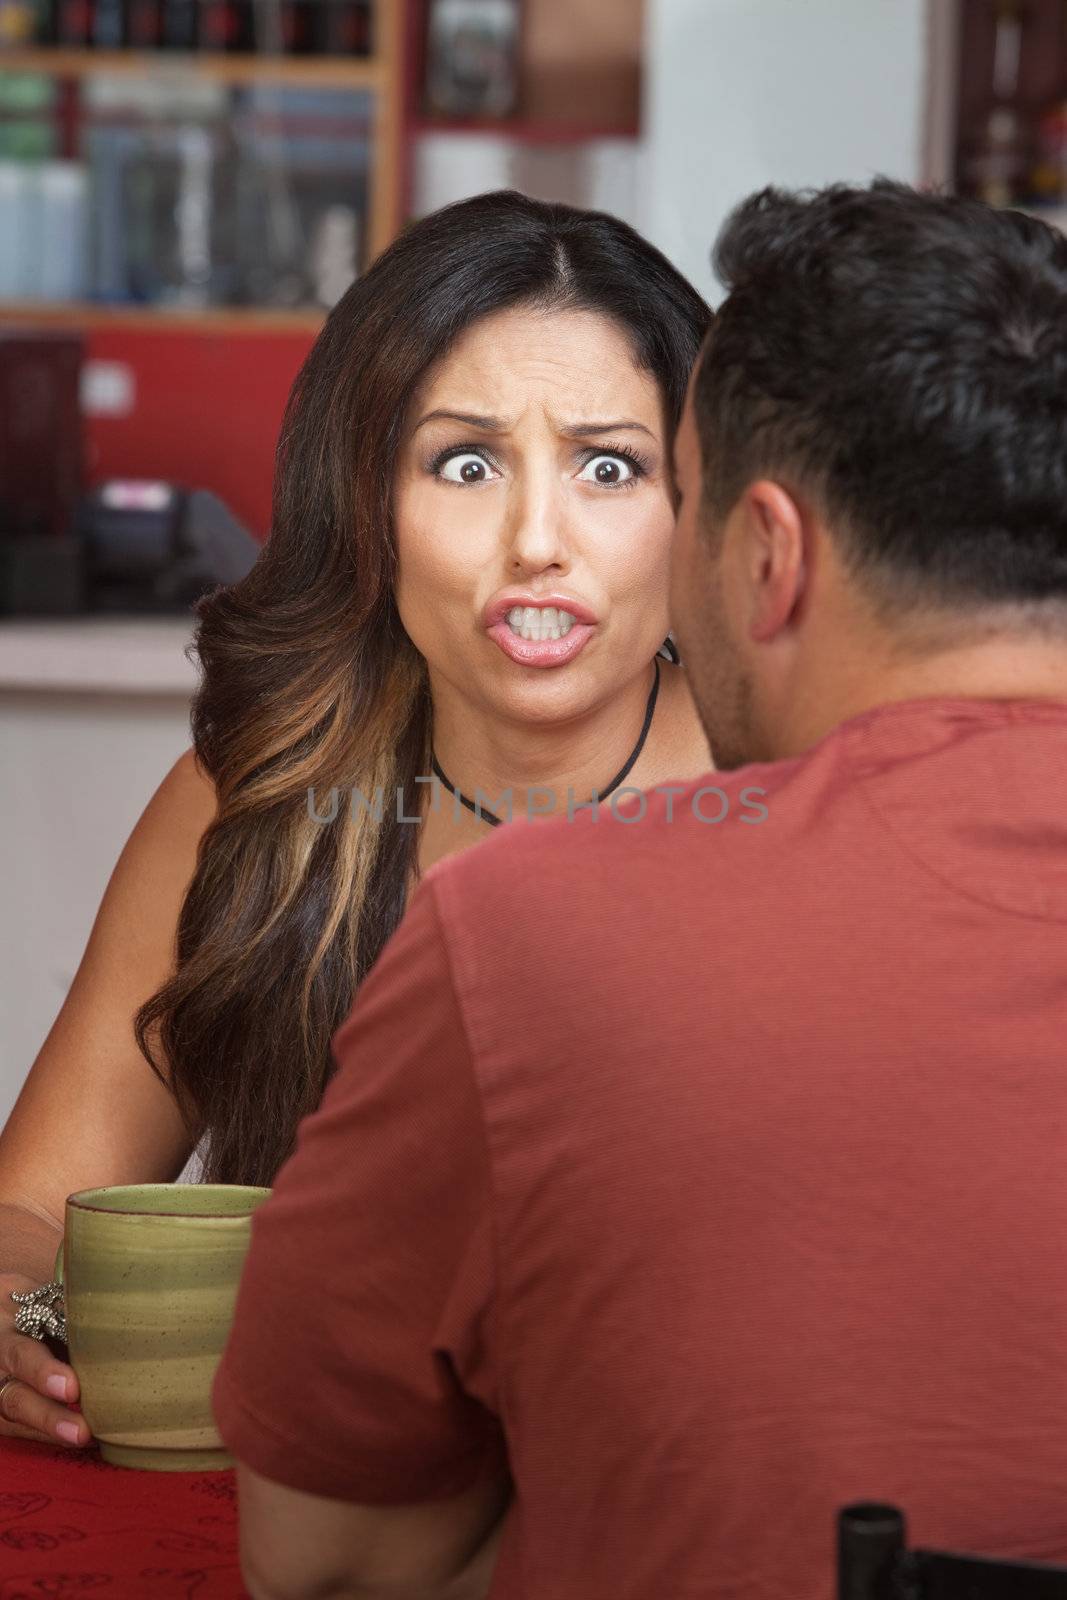 Furious woman yelling at man in restaurant